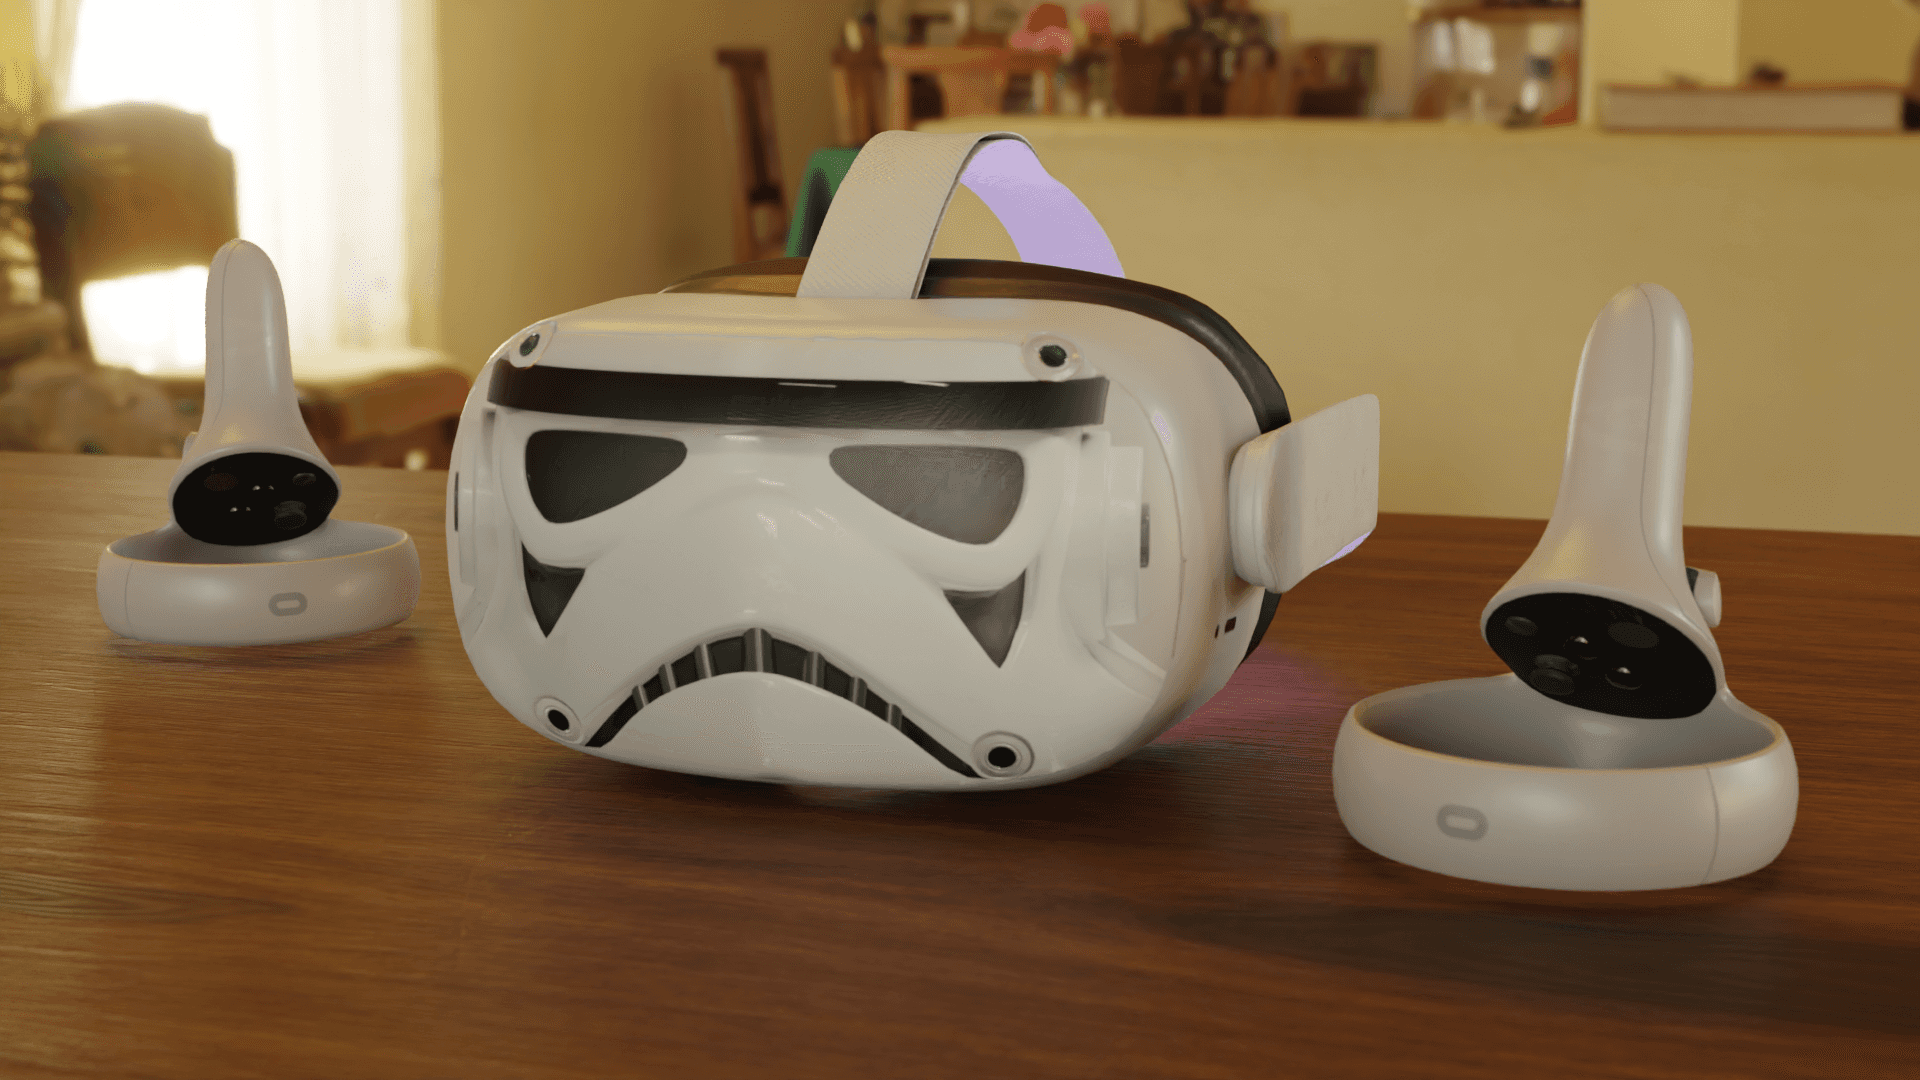 A Star Wars Stormtrooper Vr Headset Sits On A Table